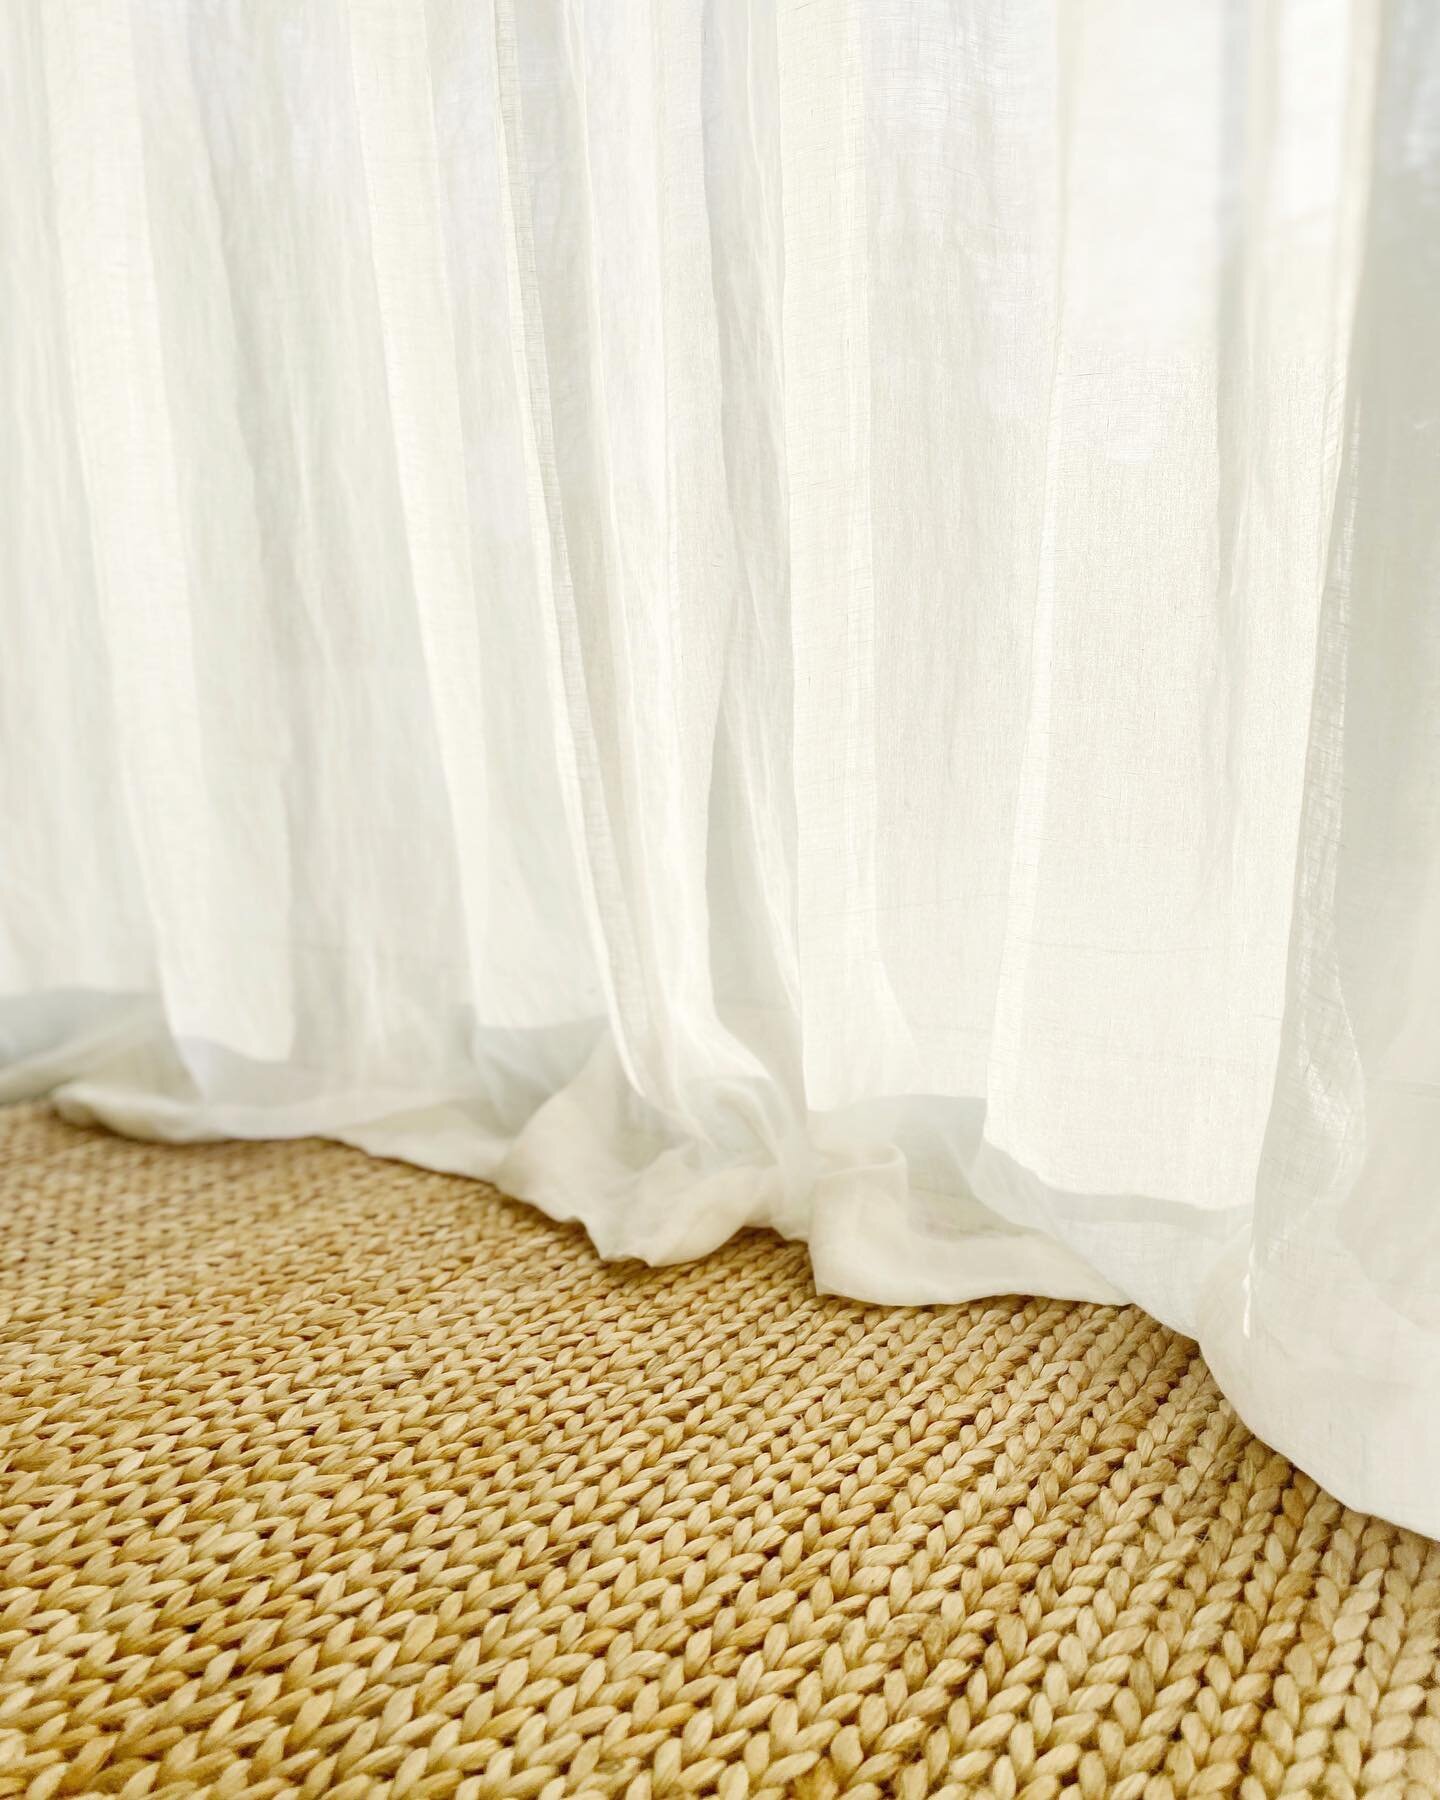 ⭐️How low do you go ??? ⭐️

The length of curtains can vary greatly from &lsquo;kissing the ground&rsquo; to a 20cm ( and sometime more! ) &lsquo;puddle&rsquo; . 

Fabric , functionality &amp; feel for the space can all dictate what length works best